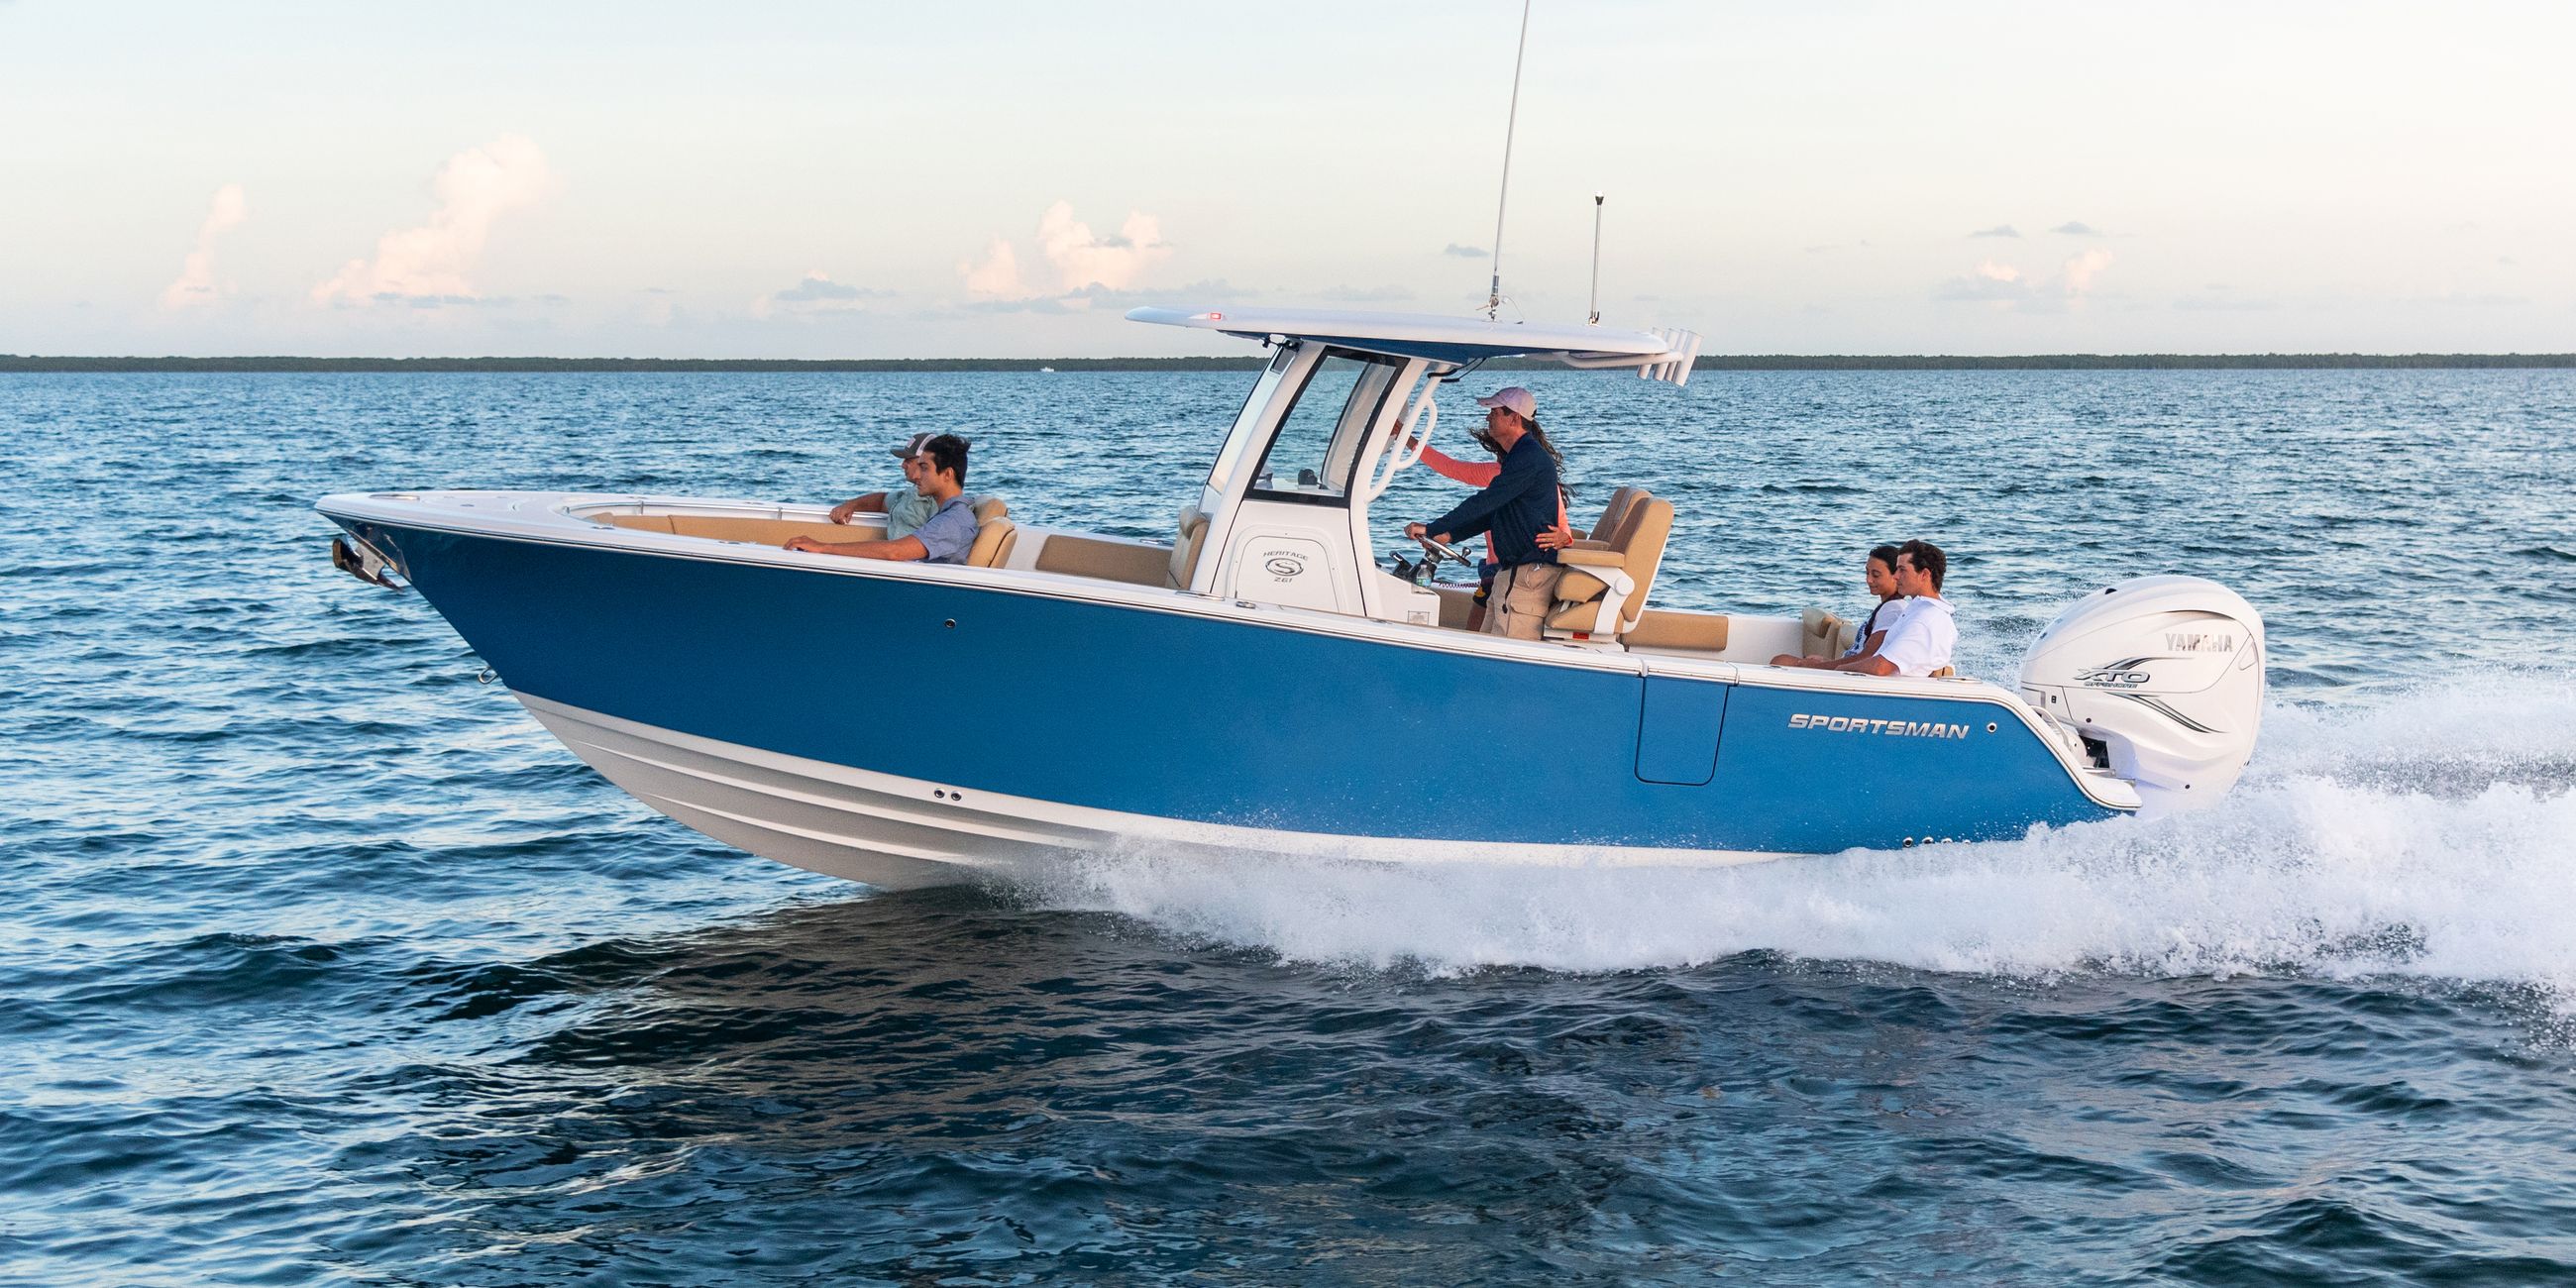 The all-new Heritage 261 running on the water.